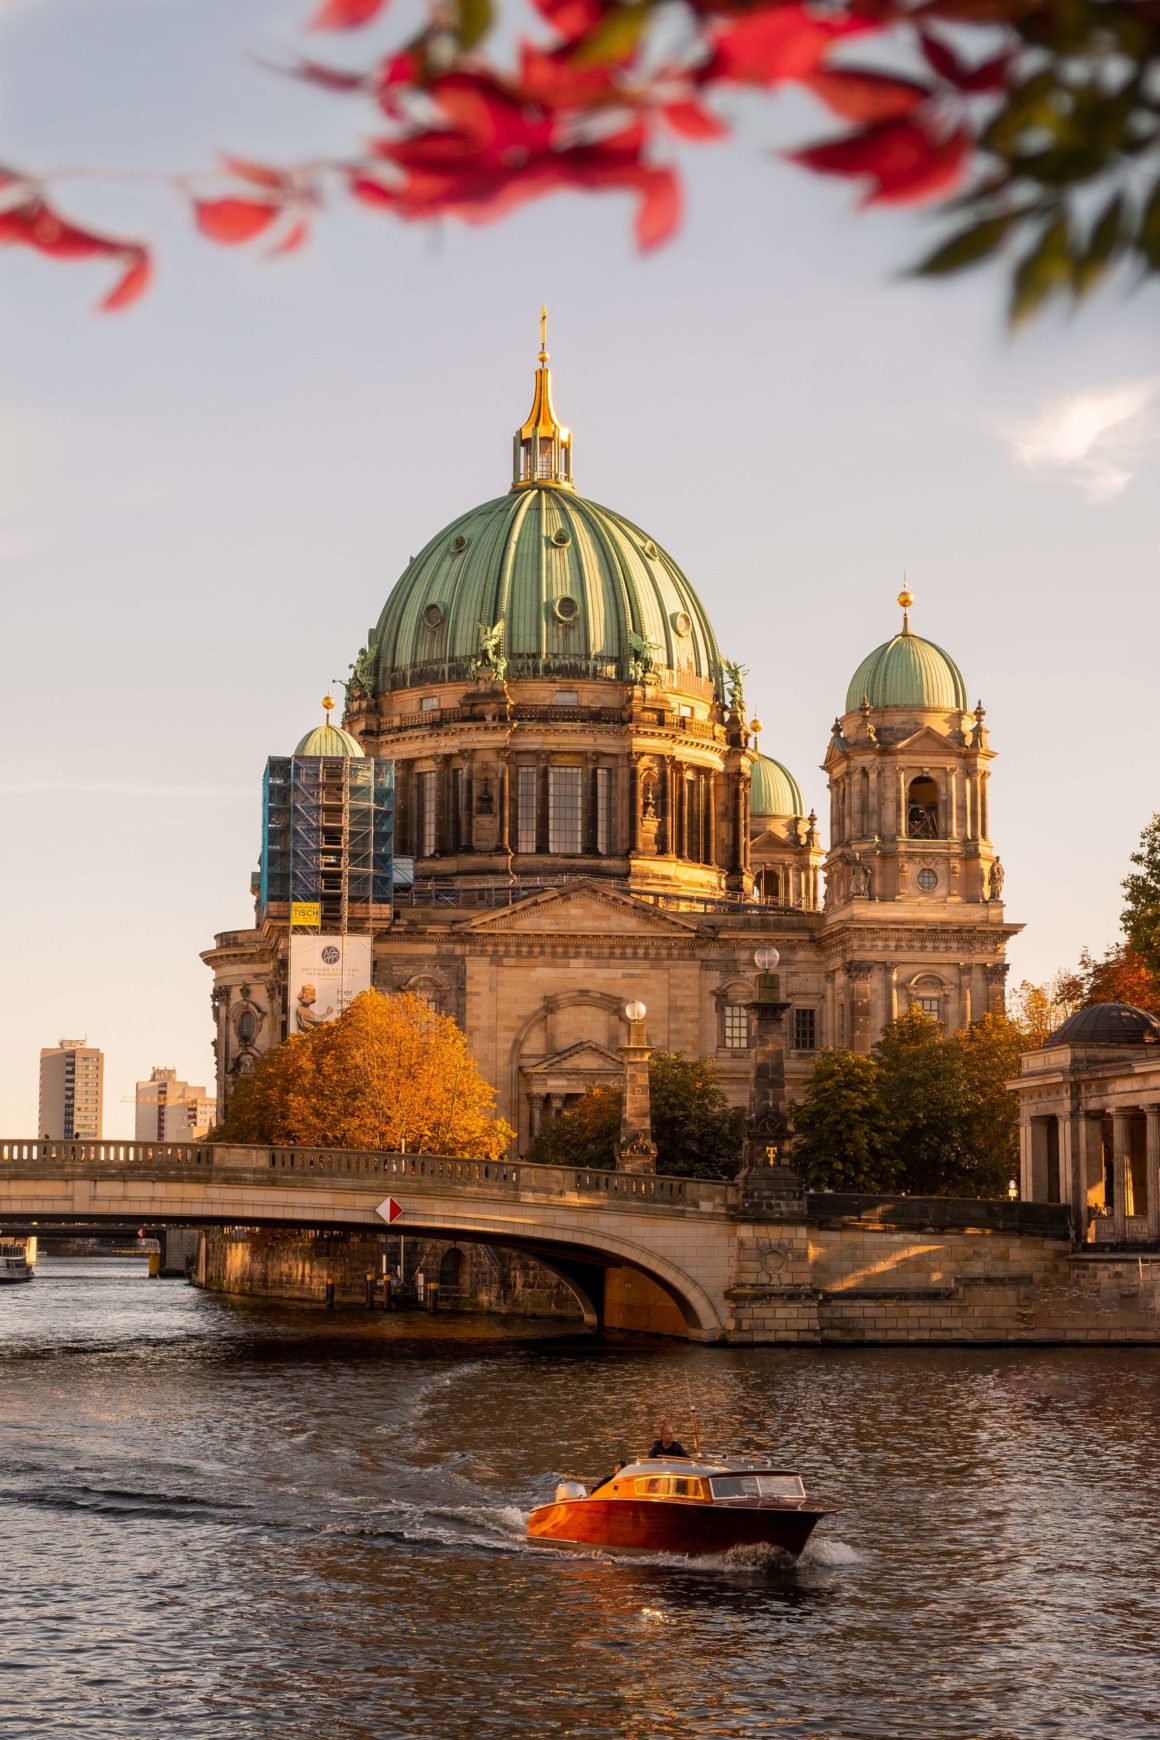 A boat on the Spree River in front of the Berlin Cathedral